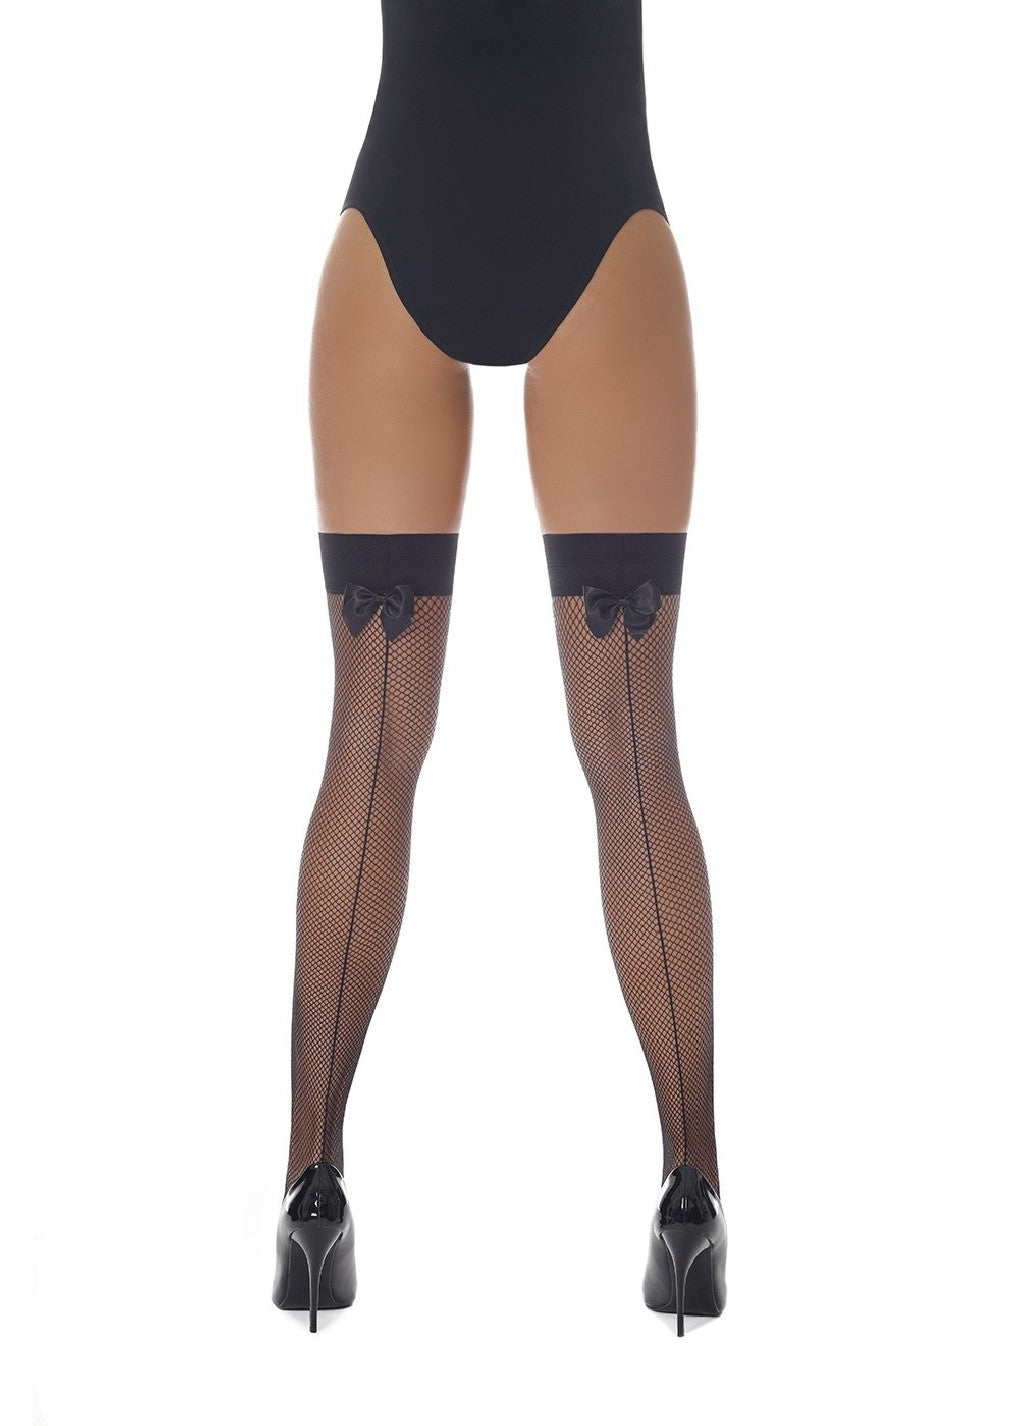 BasBleu Mikaela Hold-ups - Classic fishnet hold-ups with a back seam, smooth plain top with satin bows on the back.